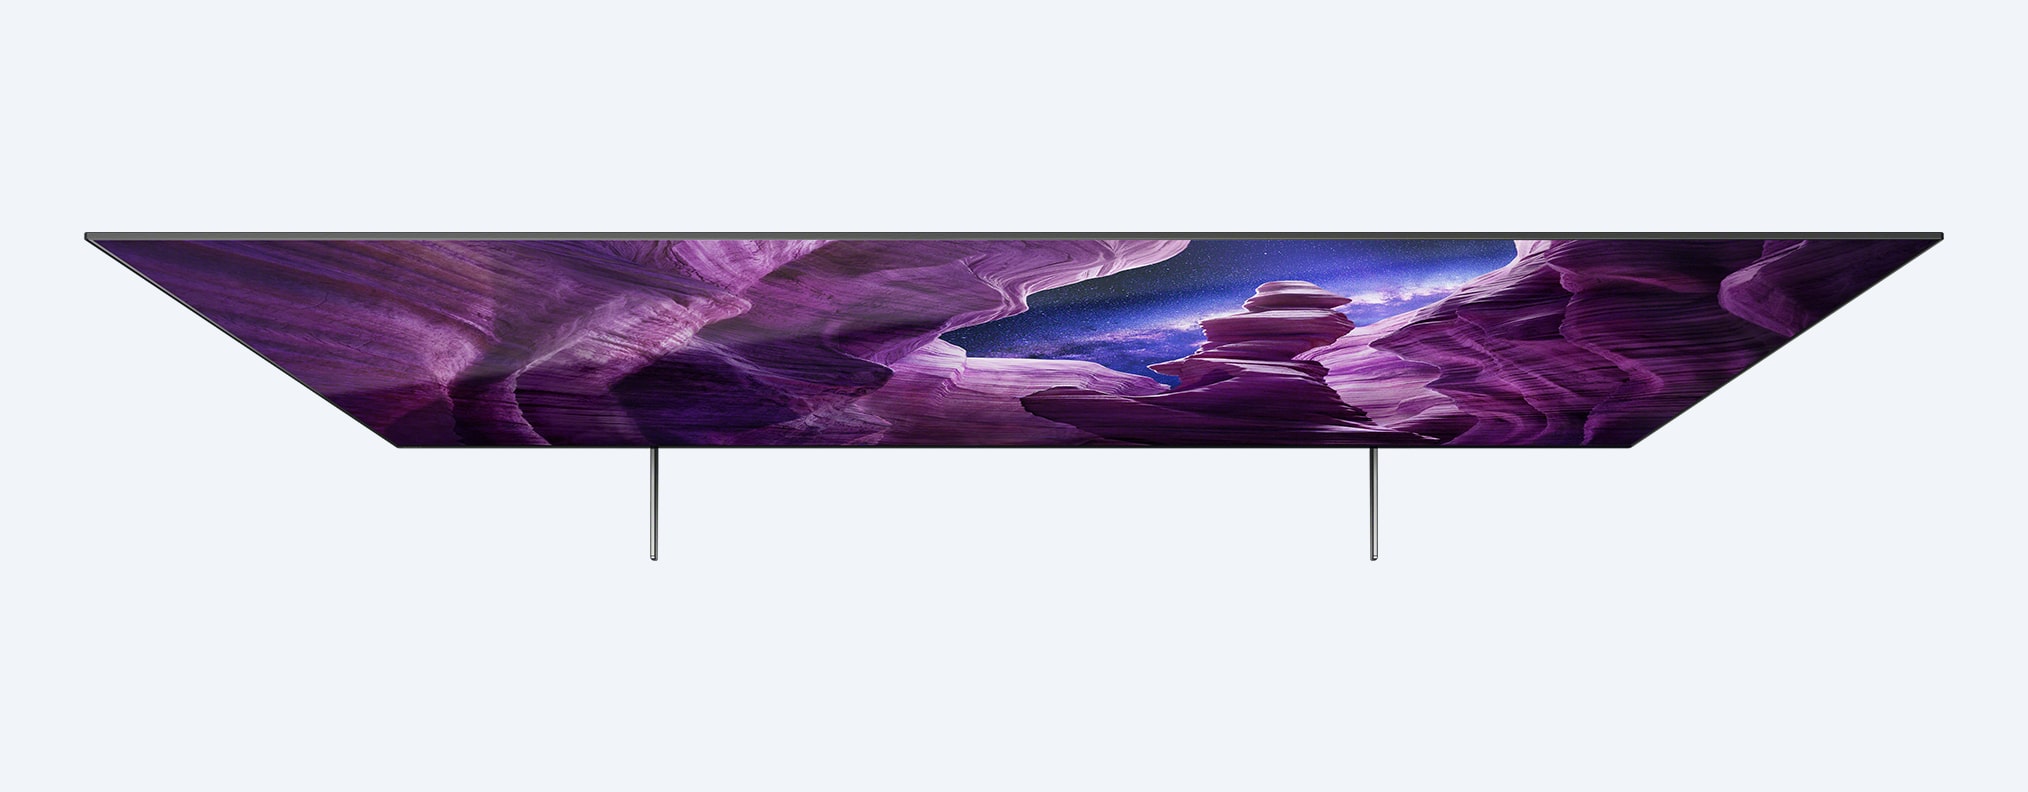 A89 | OLED | 4K Ultra HD | טווח דינמי גבוה (HDR) | Smart TV (Android TV)